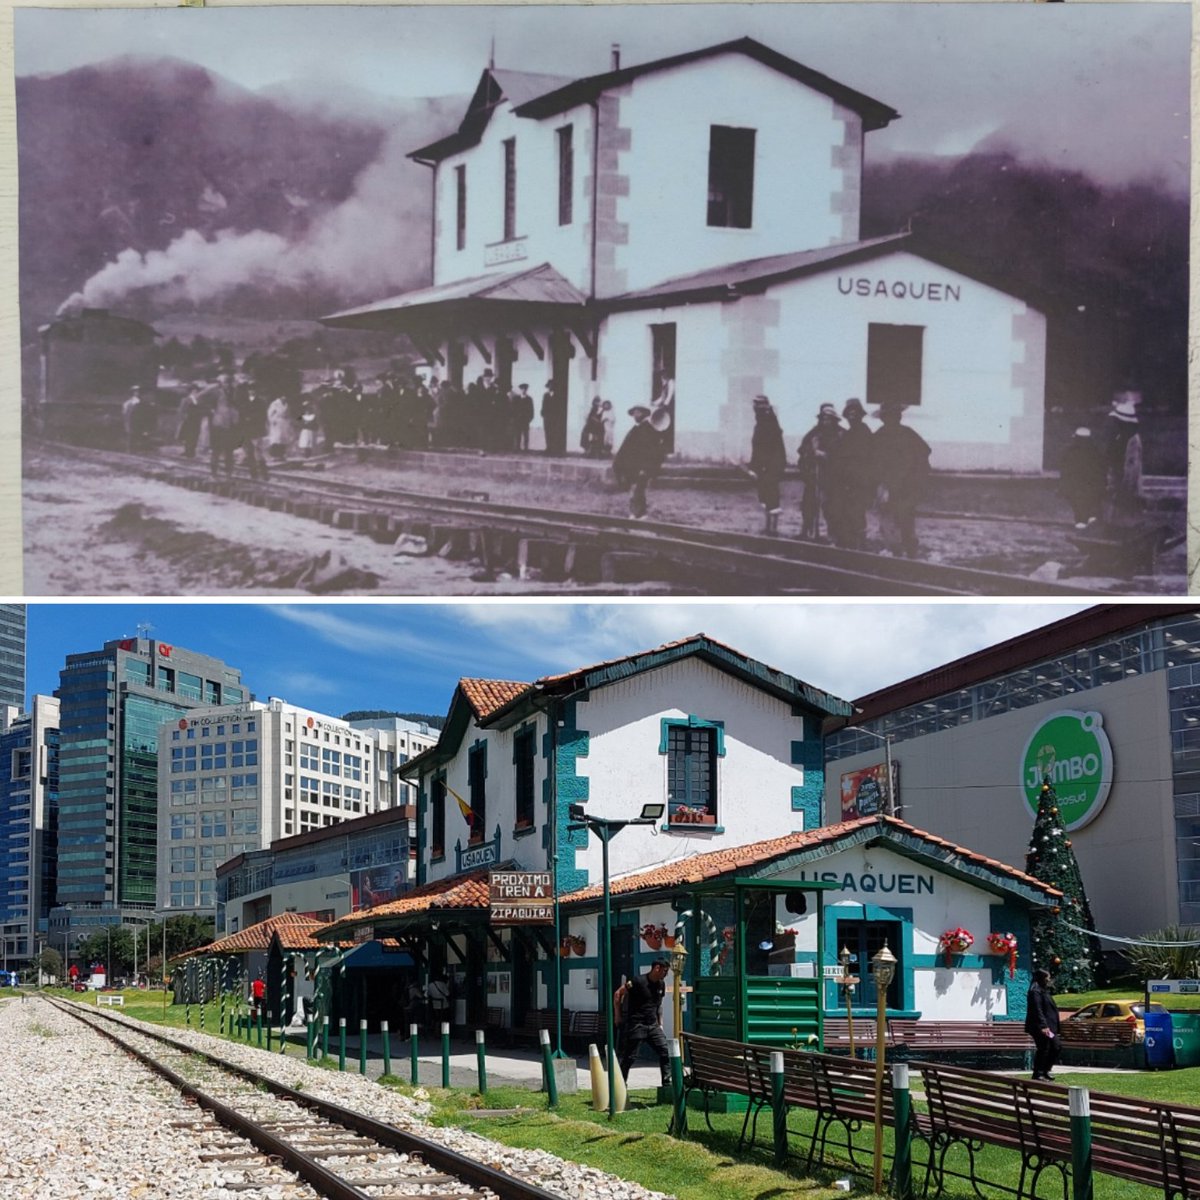 The old train station of Usaquen in northern Bogotá. Then and now.

#historyhustle #historyhustleofficial #historyhustler #bogota #bogotá #Usaquén #Usaquen #train #trainstation #OldTrainStation #thenandnow #Colombia #colombiatravel